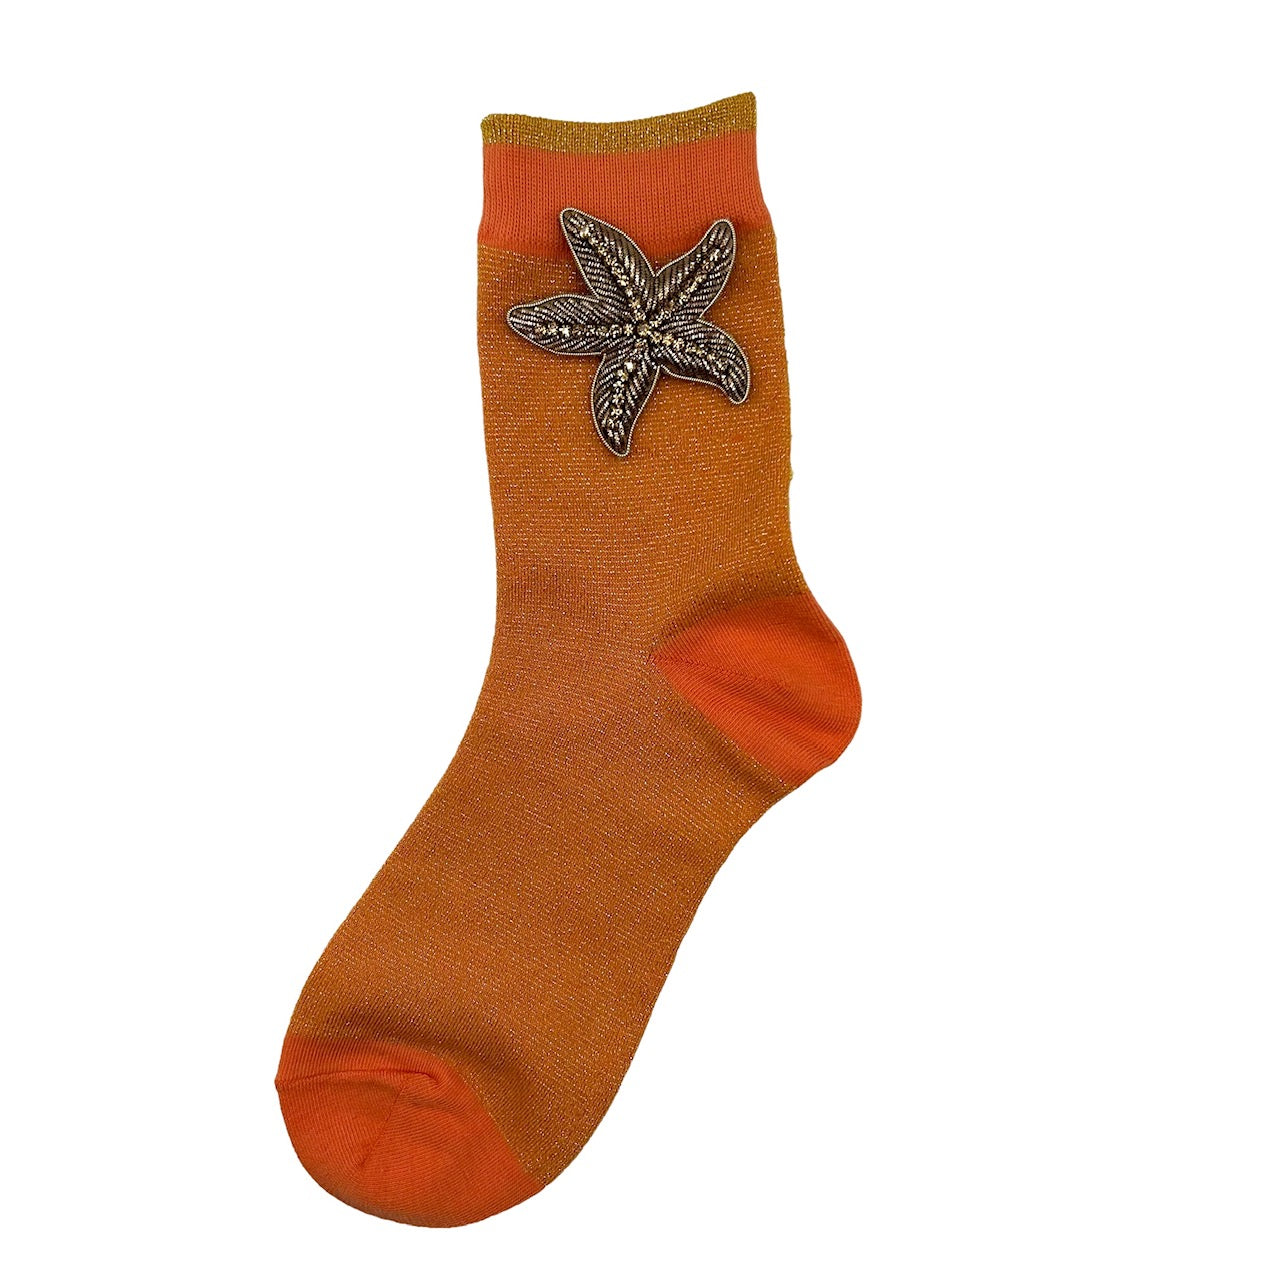 Tokyo socks in cantaloupe with a star fish brooch